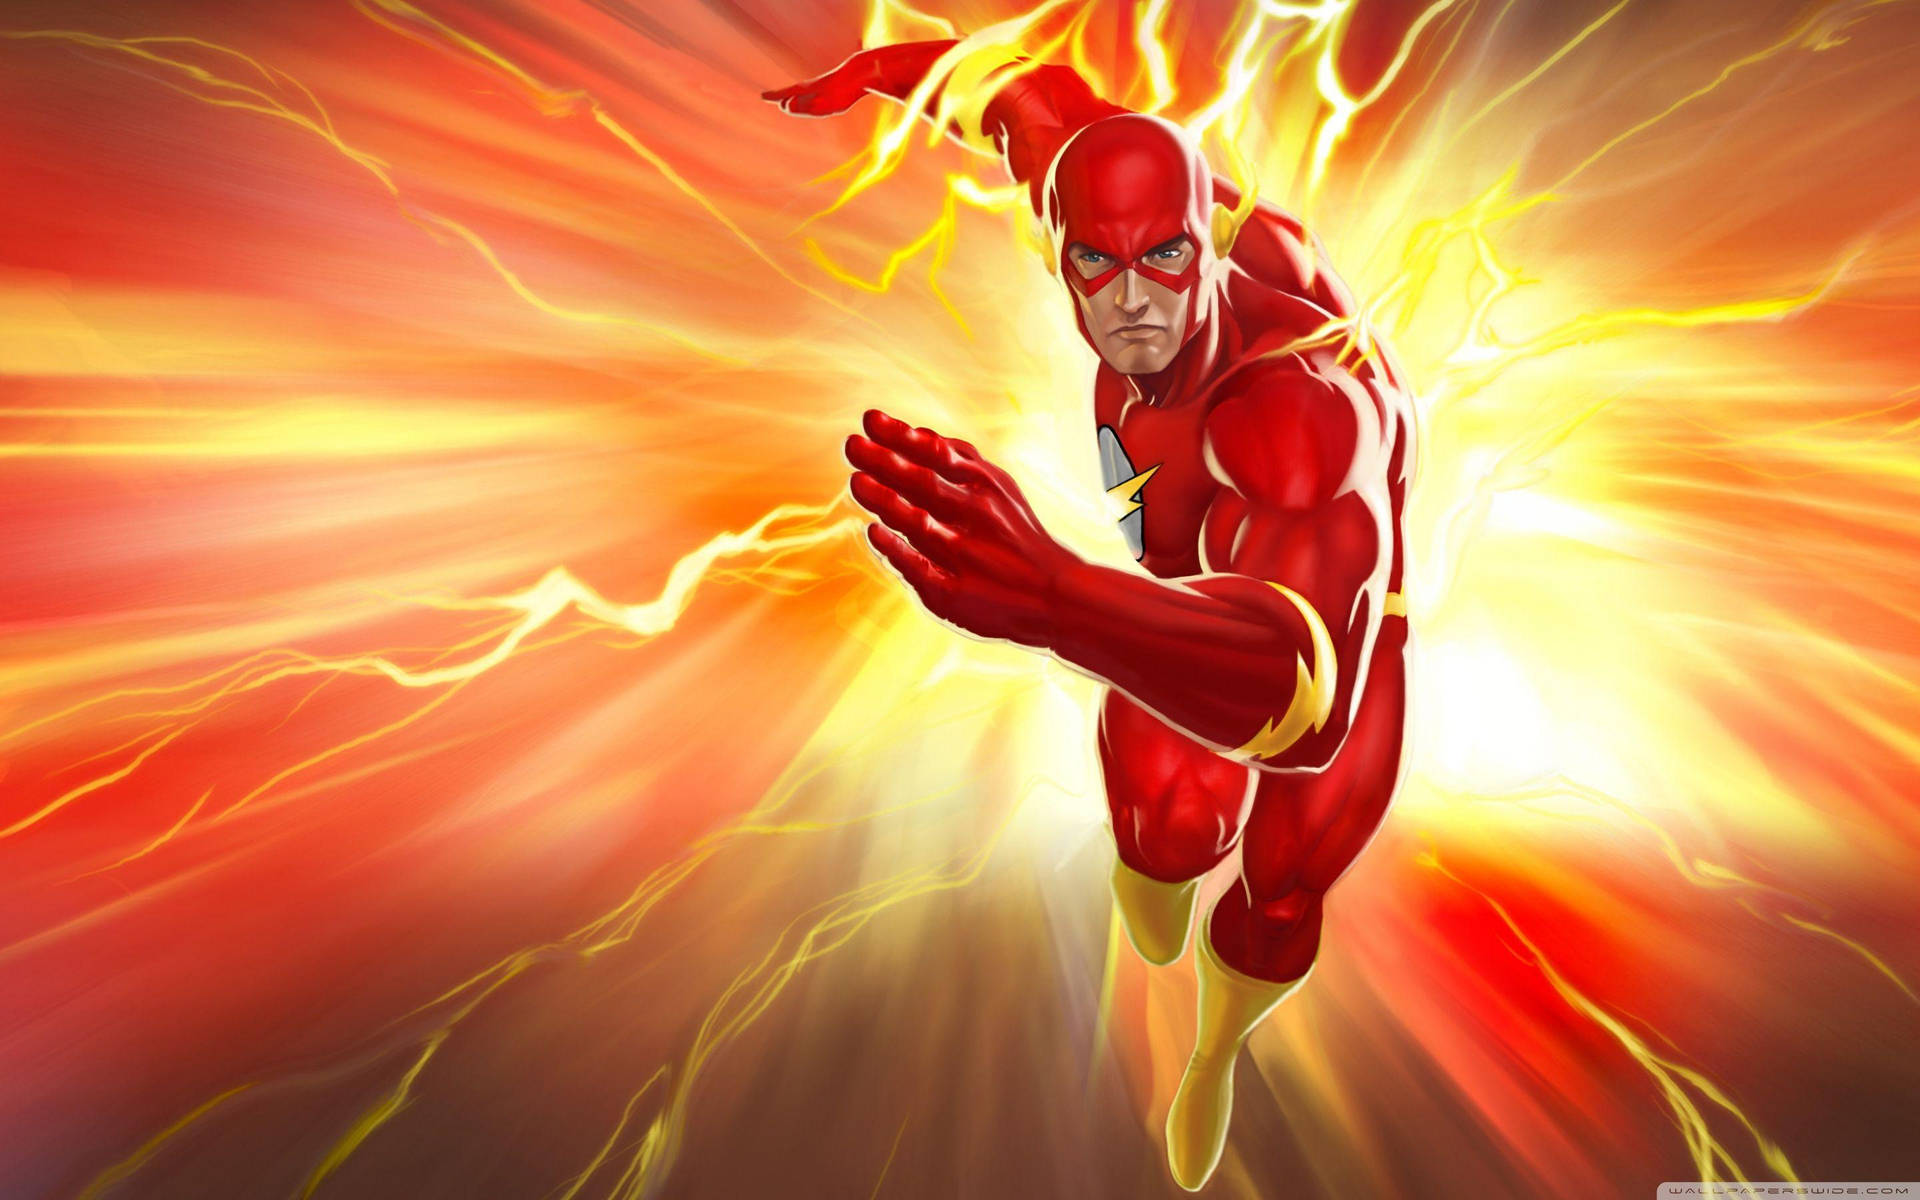 Video Game DC Universe Online The Flash Poster Wallpaper